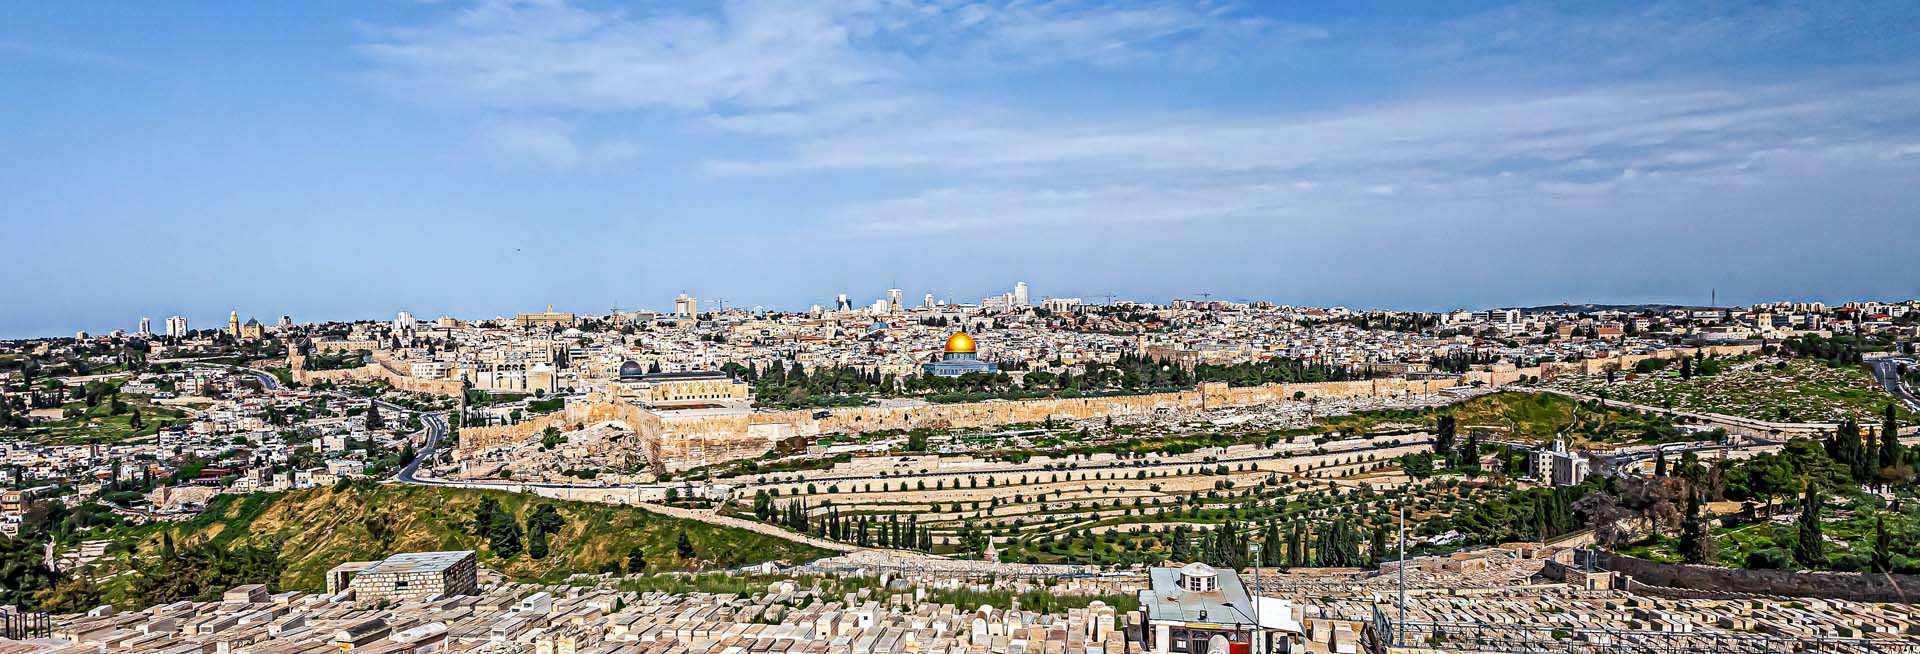 holy land travel and tours